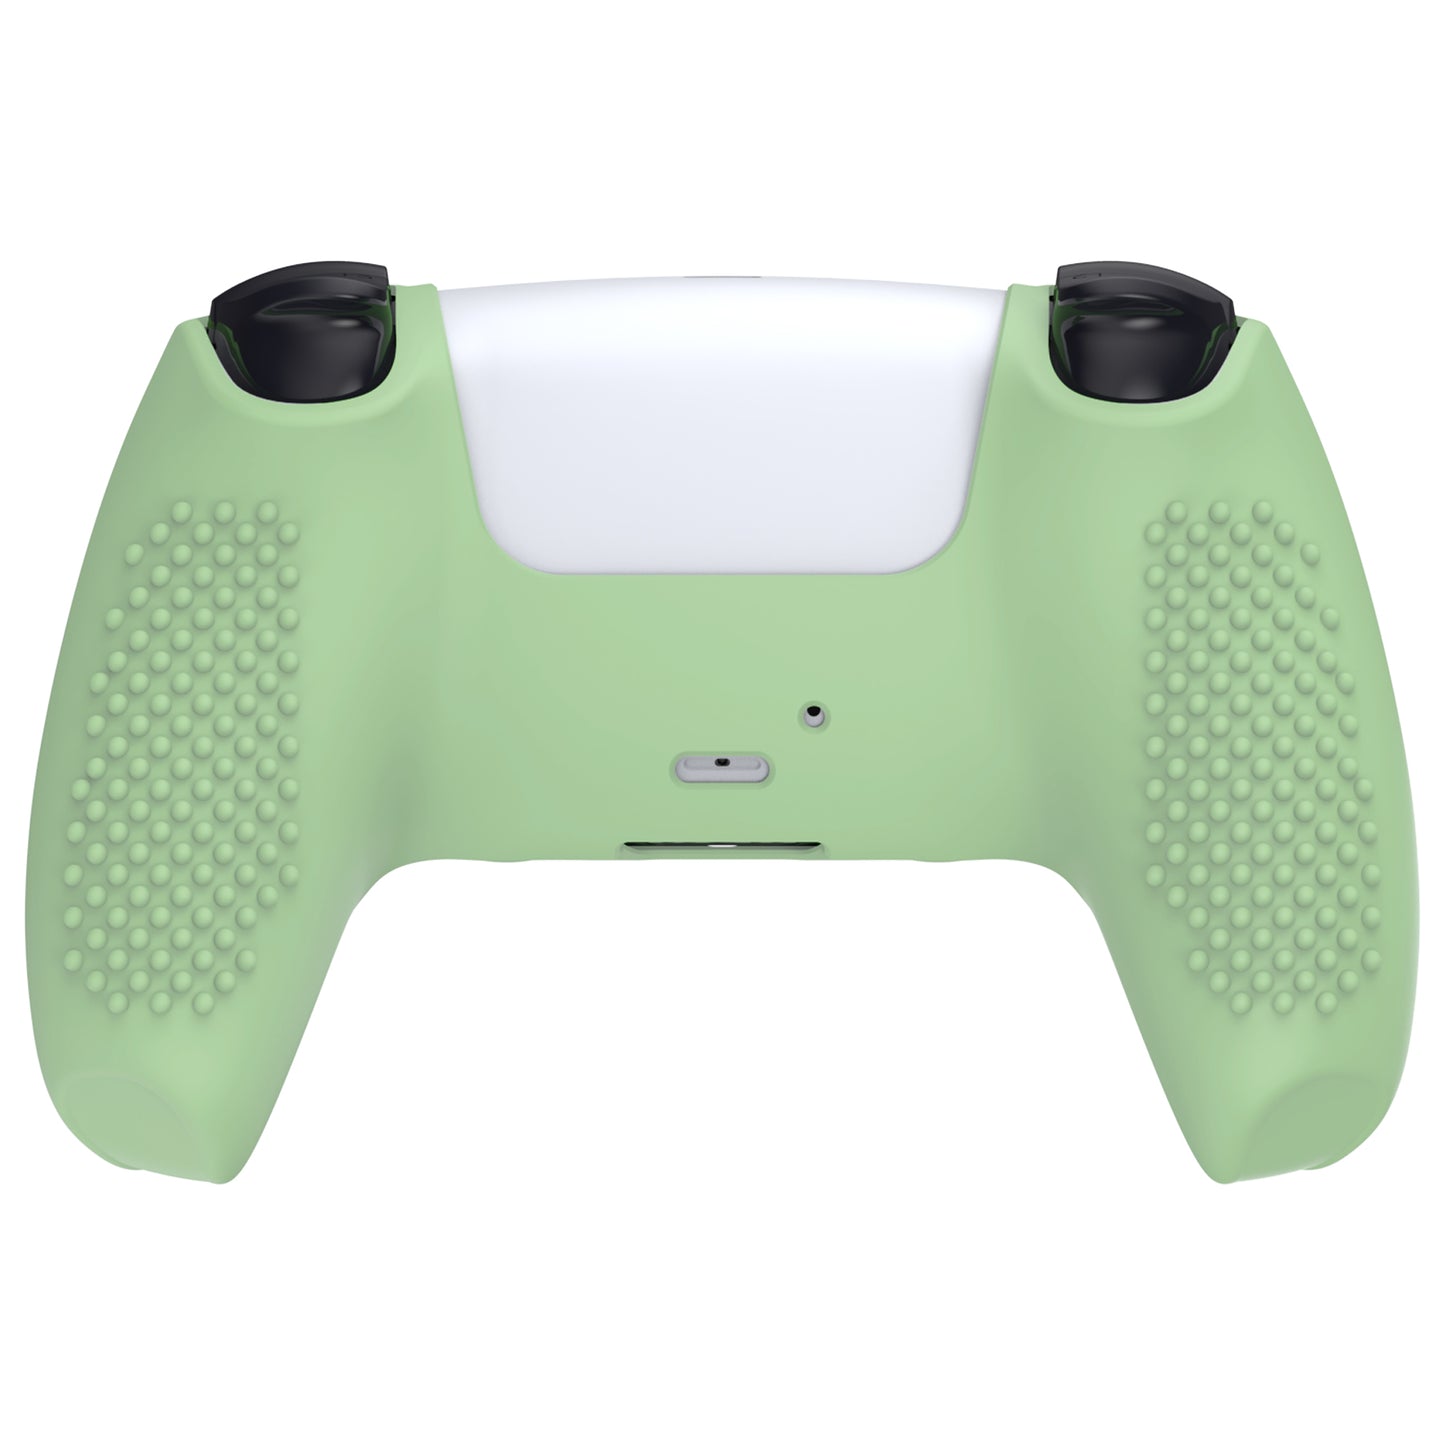 PlayVital 3D Studded Edition Anti-Slip Silicone Cover Skin with Thumb Grip Caps for PS5 Wireless Controller - Matcha Green - TDPF028 PlayVital